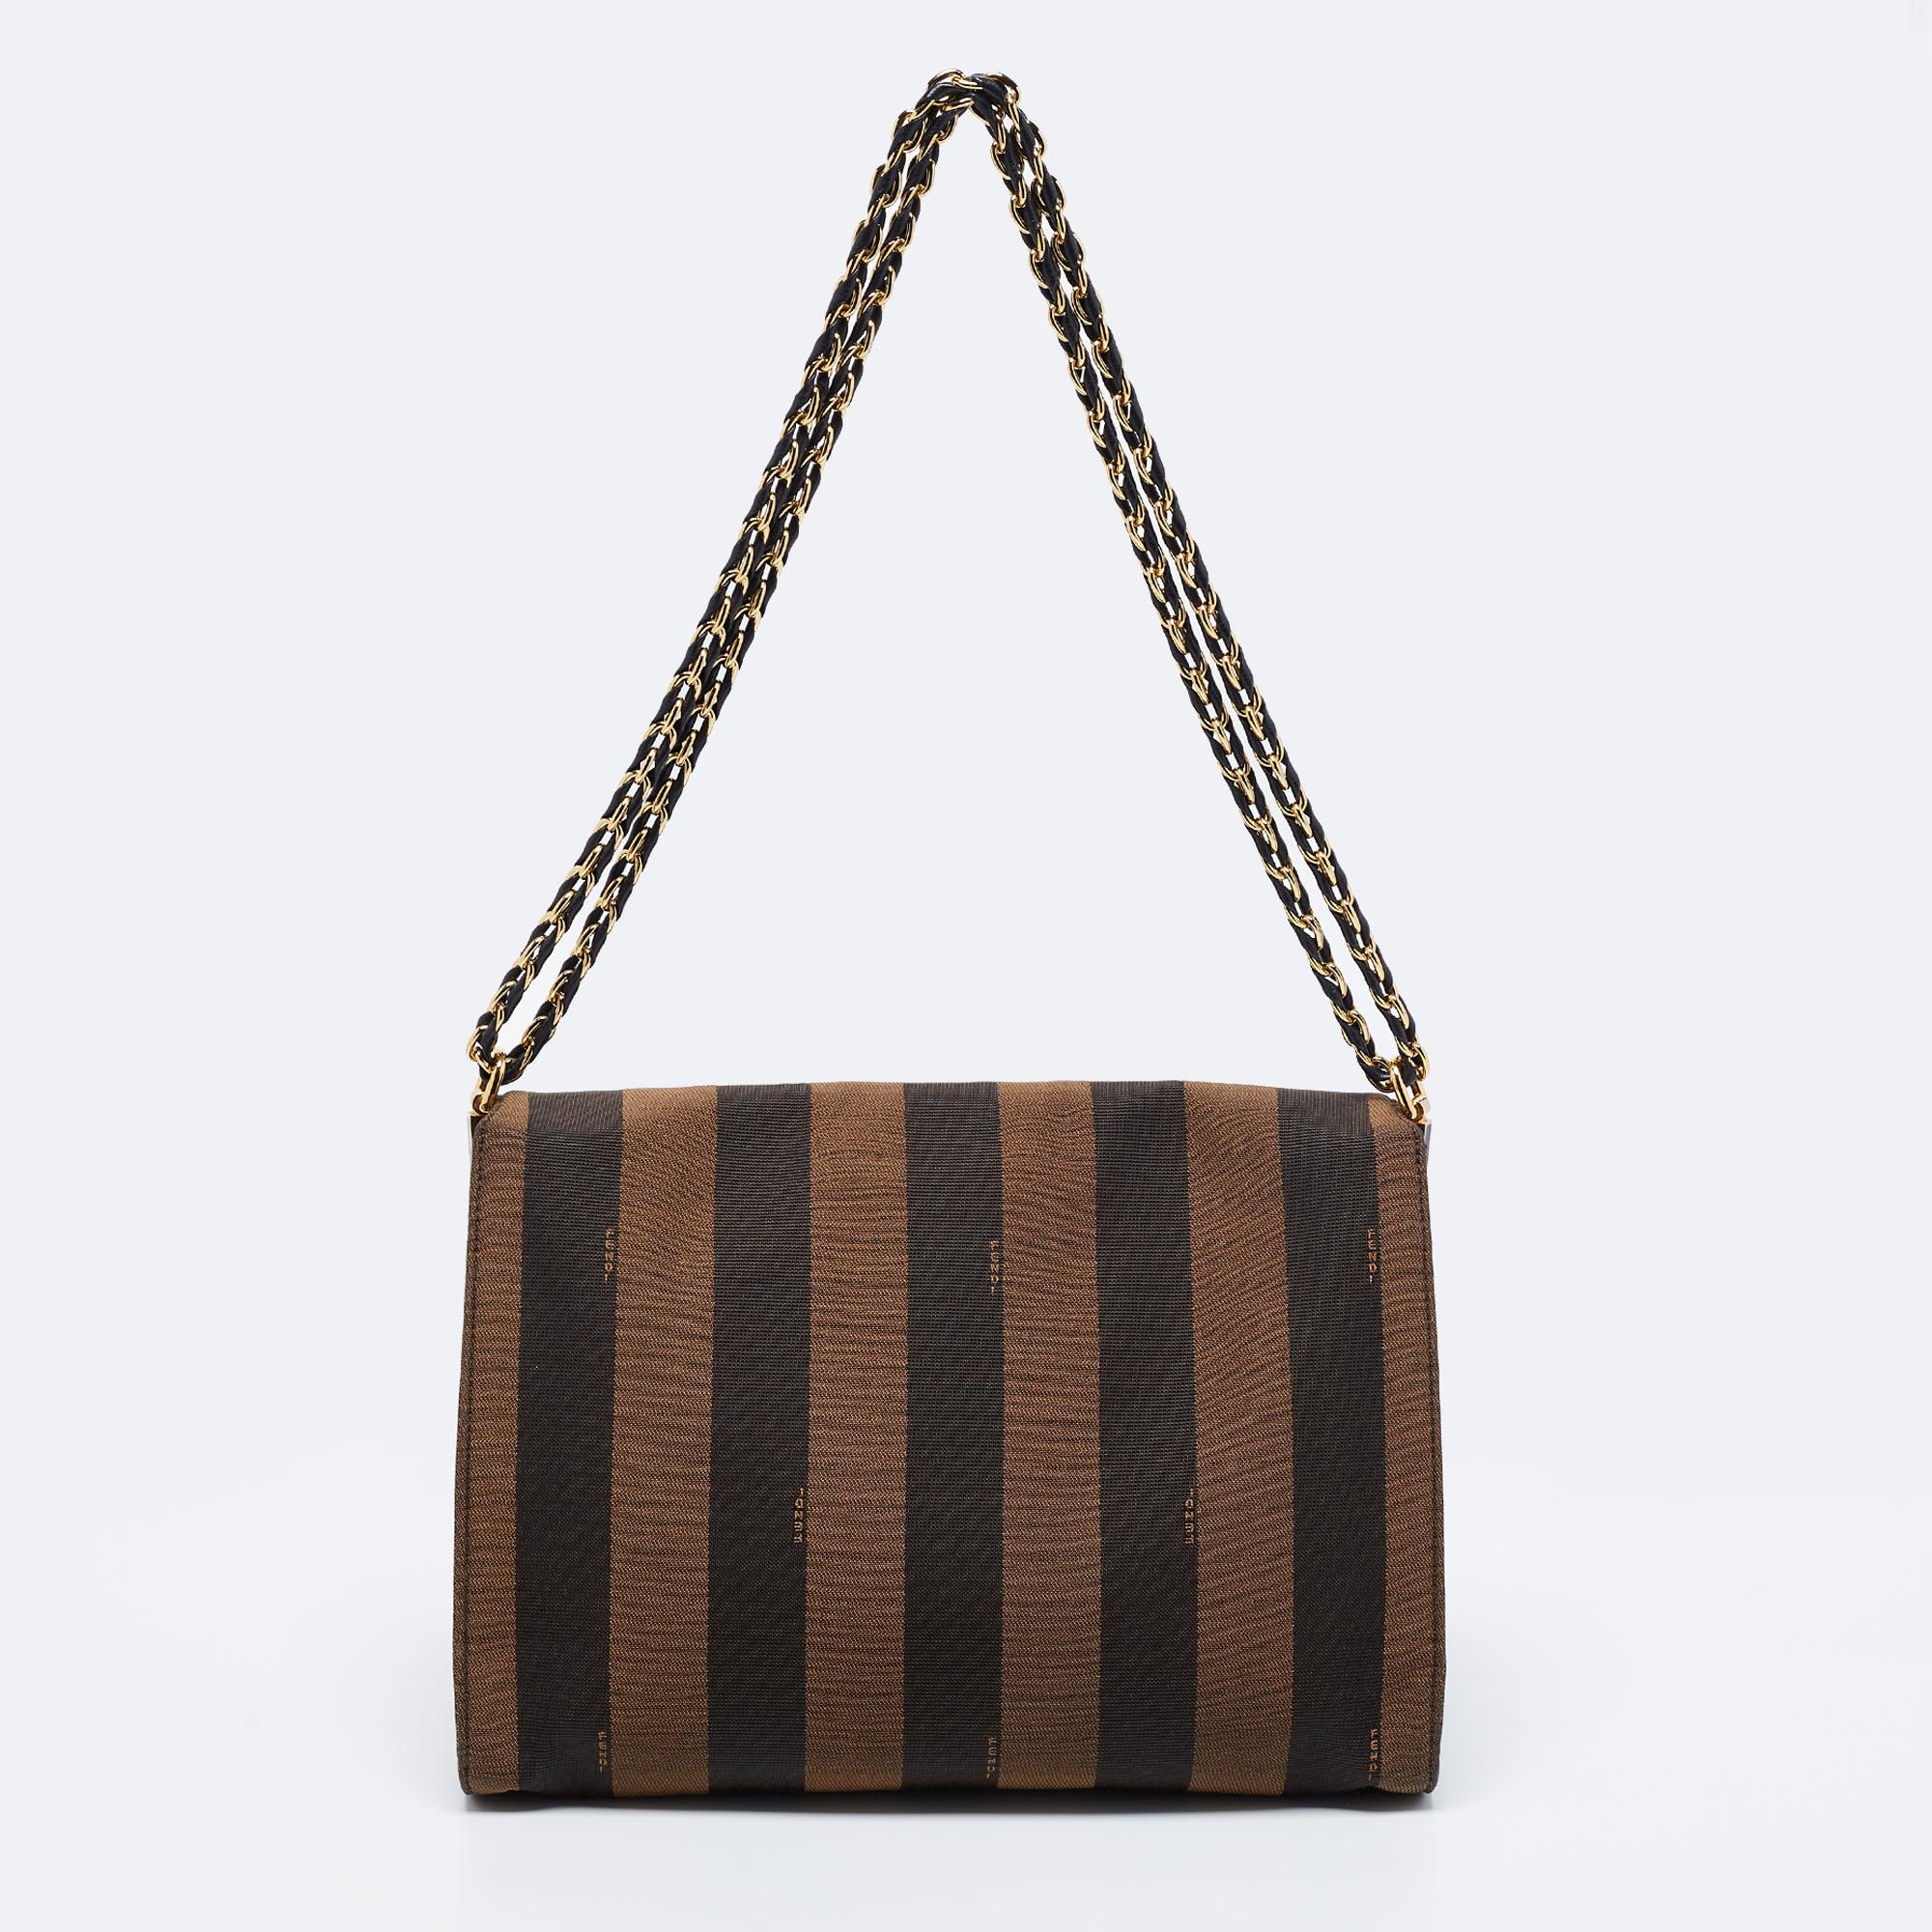 This Claudia bag by Fendi has an eye-catching display and a sophisticated look. Crafted from Pequin canvas, it is held by dual chain handles and gets a recognizable accent with the branded lock closure on the front. The canvas and suede interior of